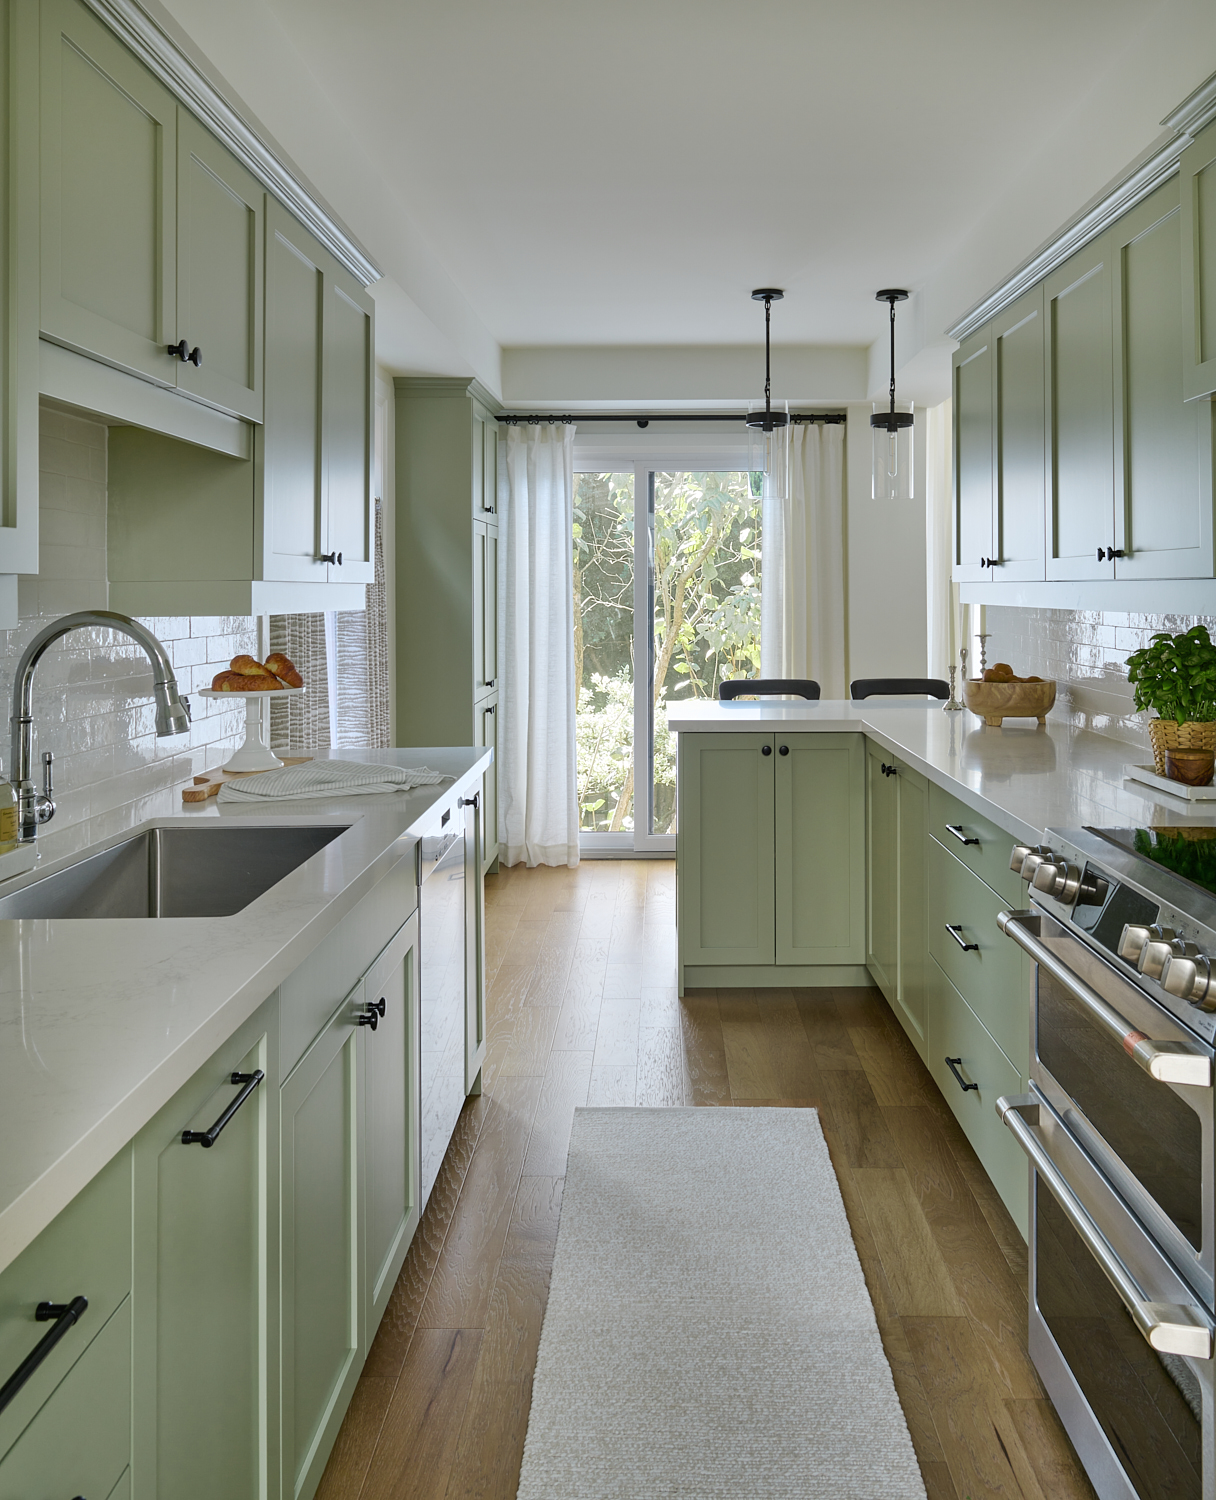 kitchen with light green cabinets, oak wood floors, white countertops and tiled backsplash